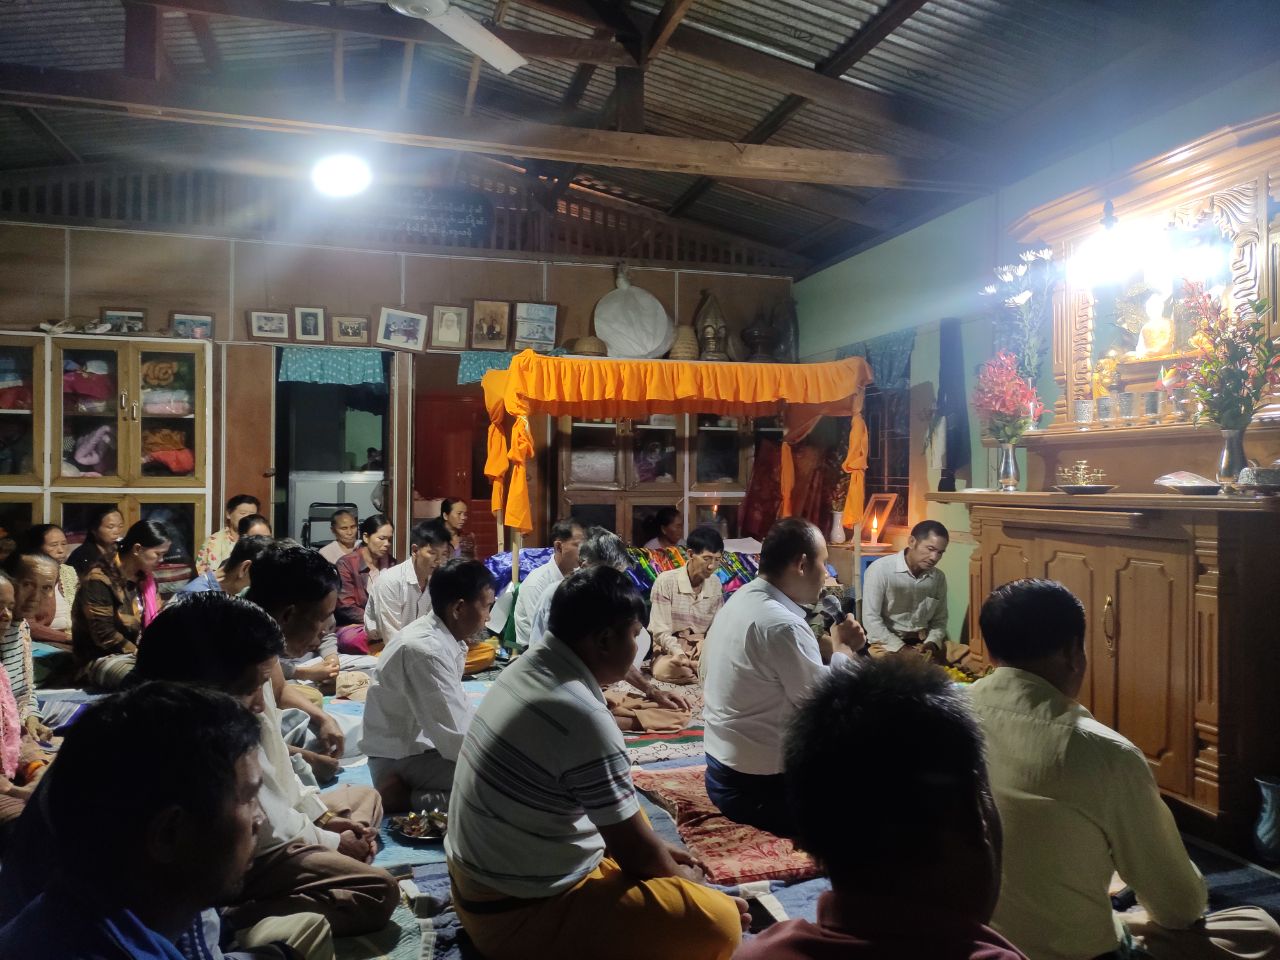 Zare Sai Jom Hlaing Han reciting lik long poetry in a Shan funeral, with the family members of the deceased and elderly villagers listening to the recitation and paying homage to the altar of the Buddha in Namkham, Northern Shan State, Myanmar. Photo: Bikash K. Bhattacharya